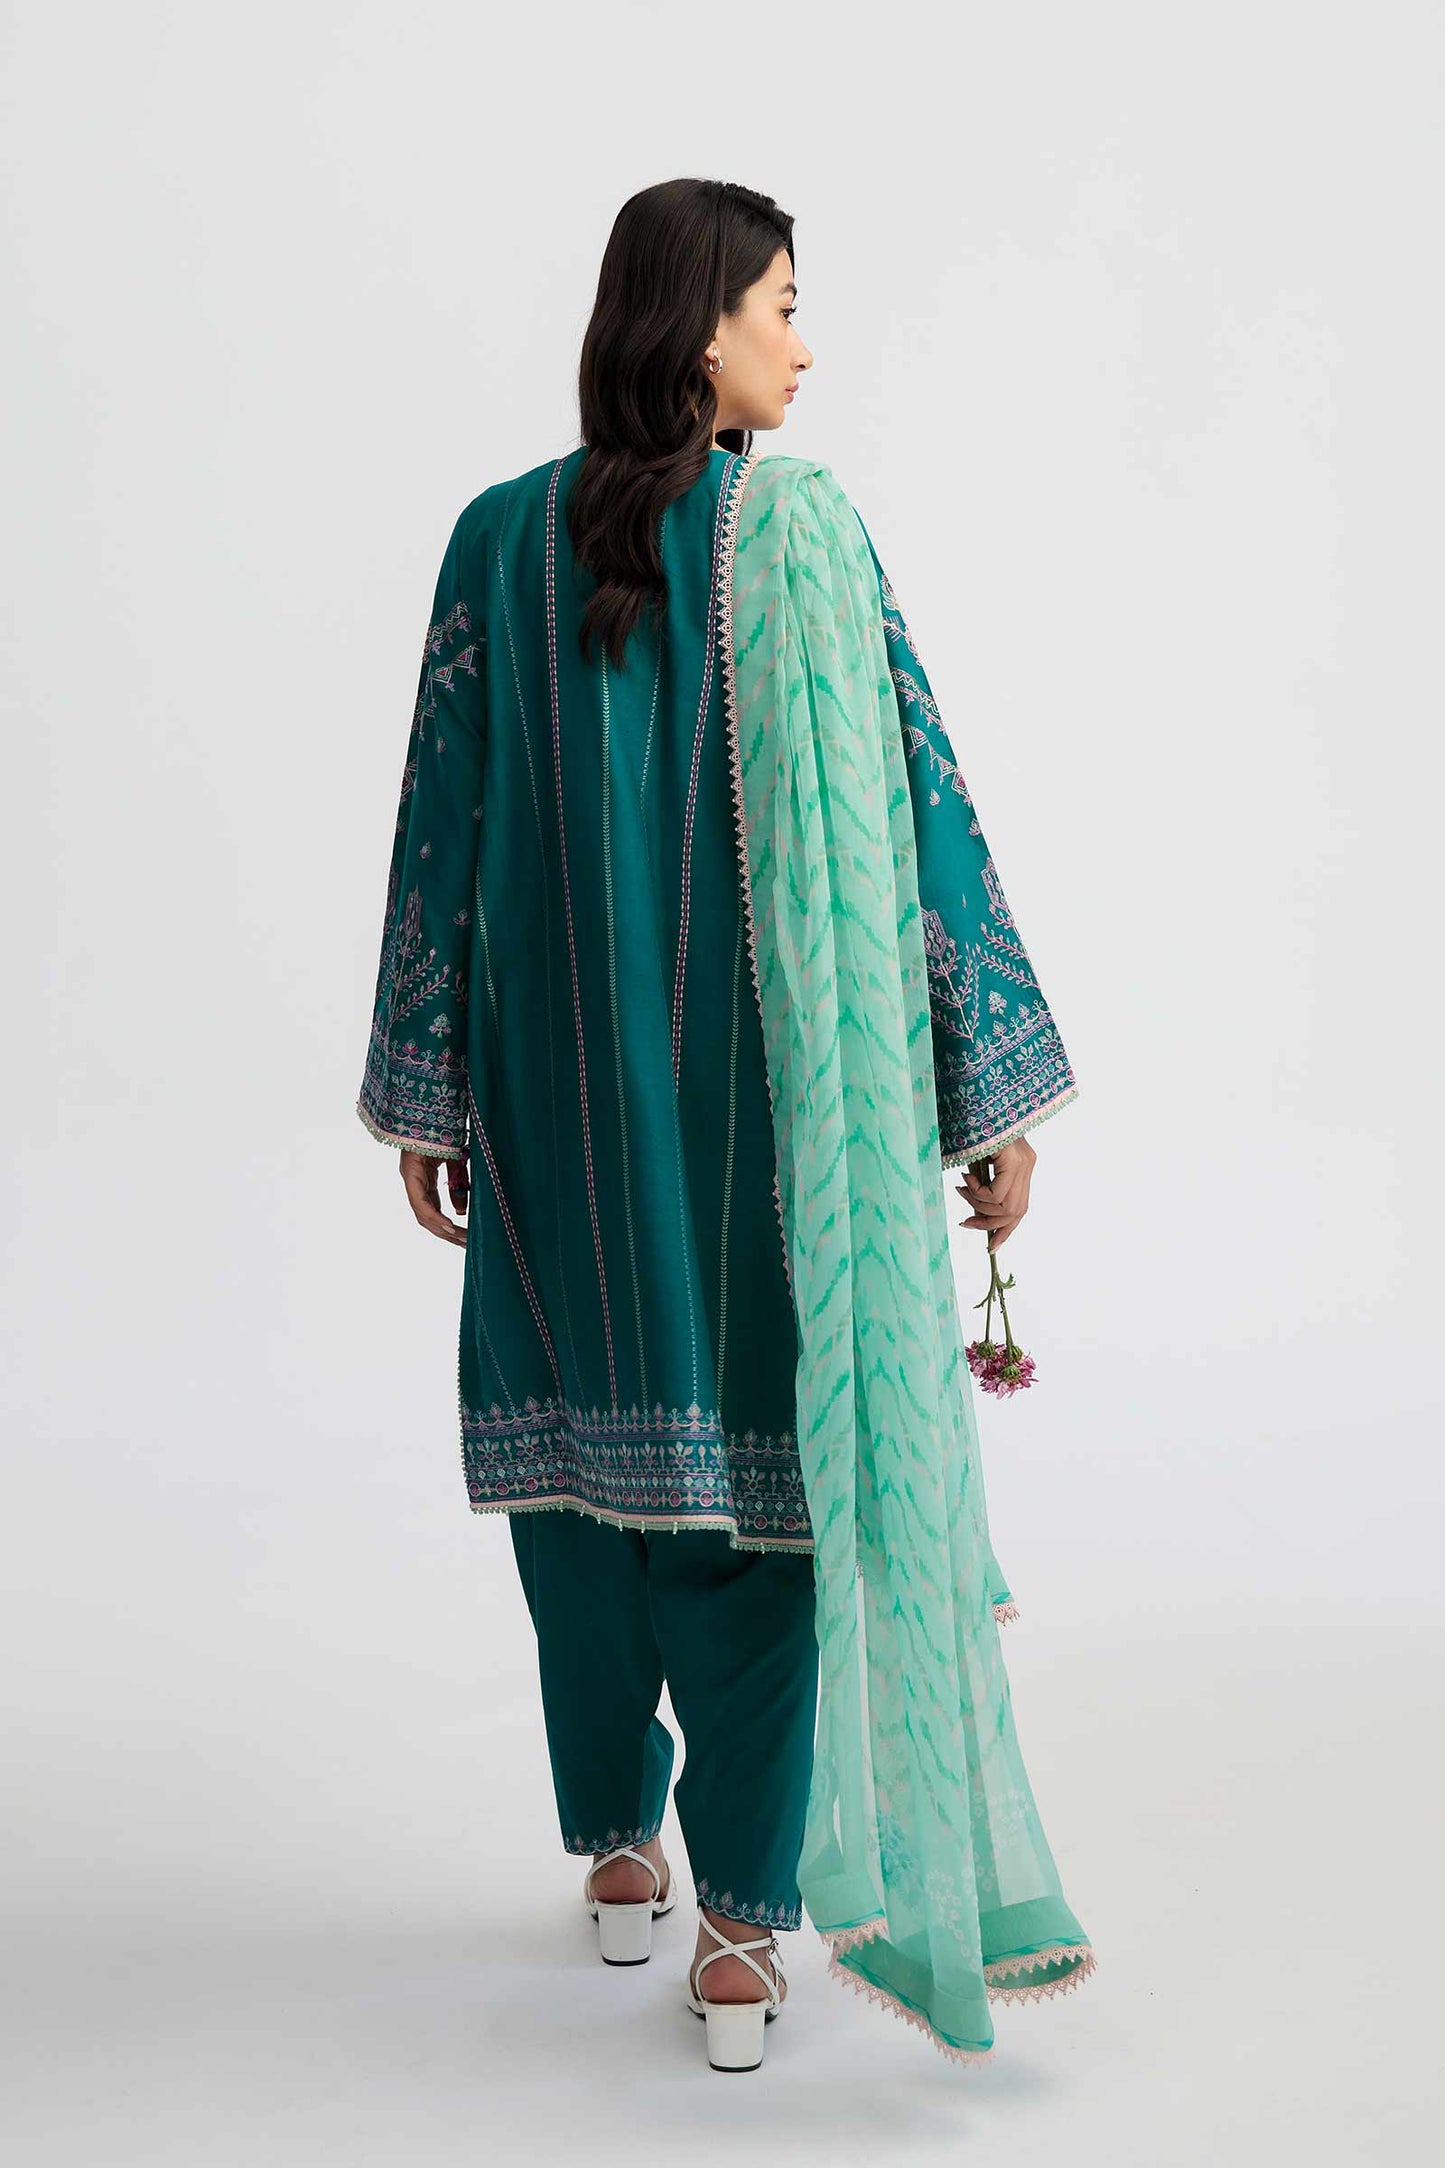 Coco by Zara Shahjahan Embroidered Lawn Suits Unstitched 3 Piece Z23-4a